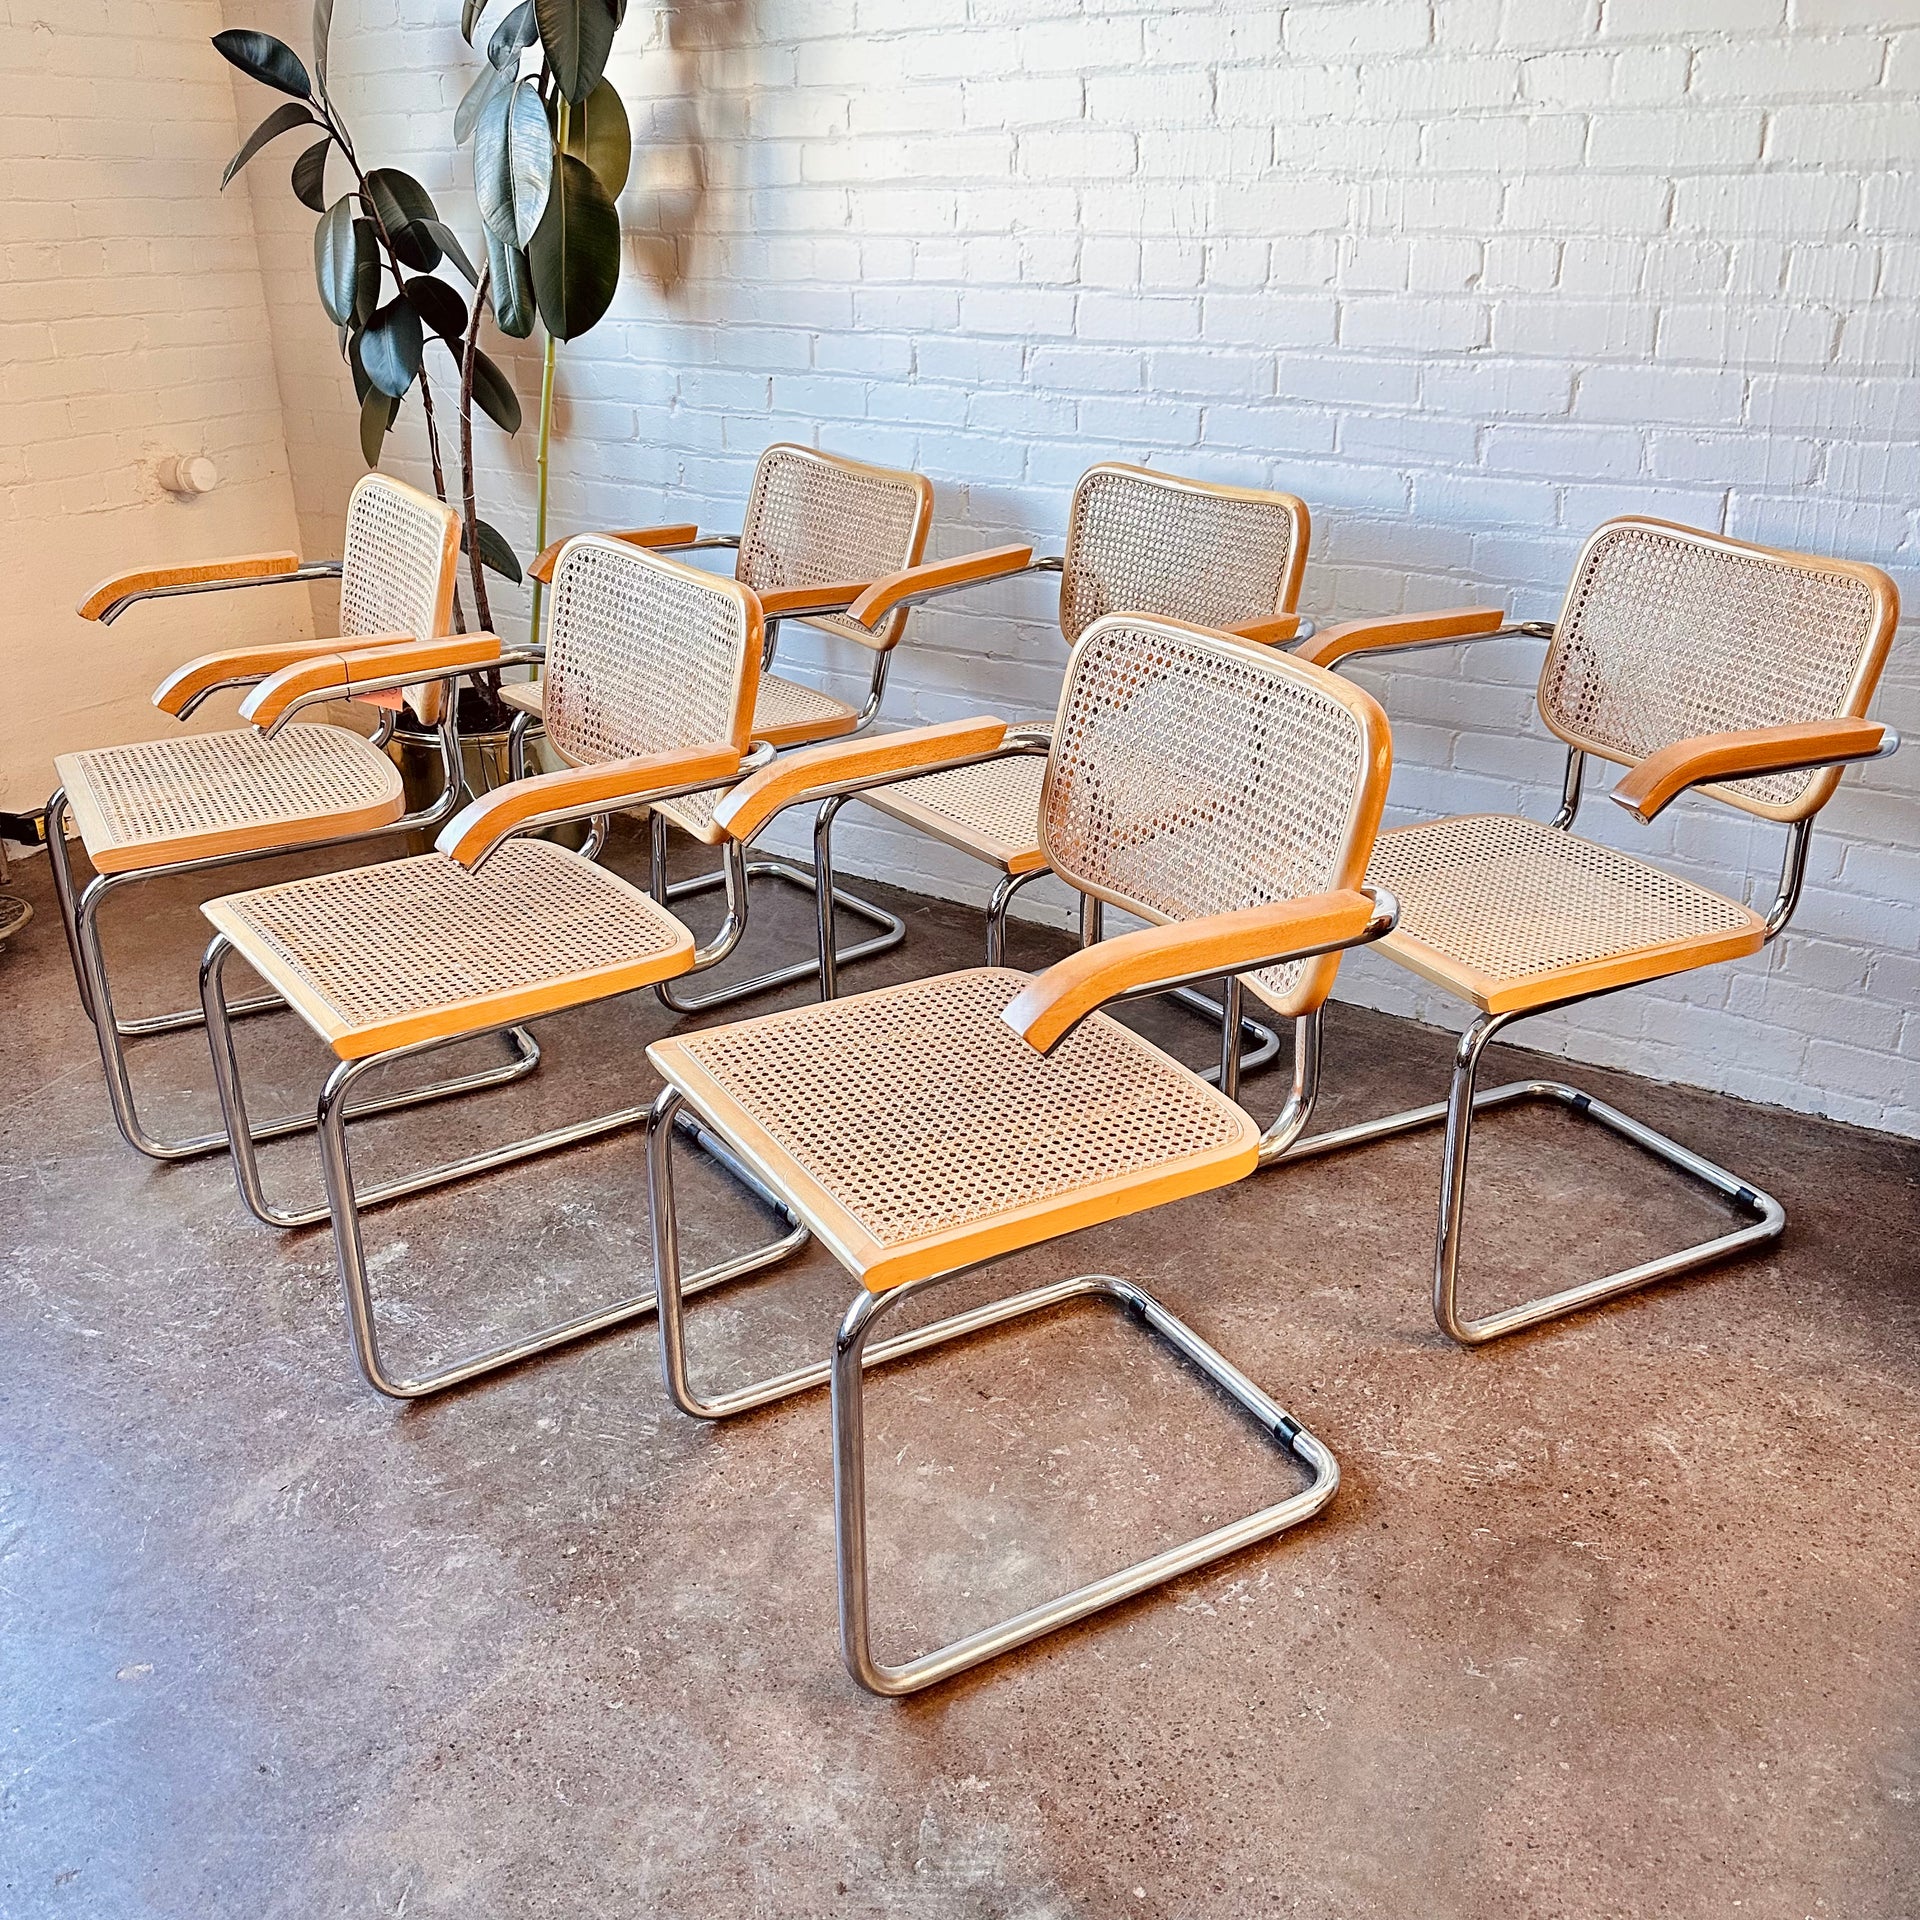 SET OF 6 MARCEL BREUER CESCA CANED ARM CHAIRS, MADE 